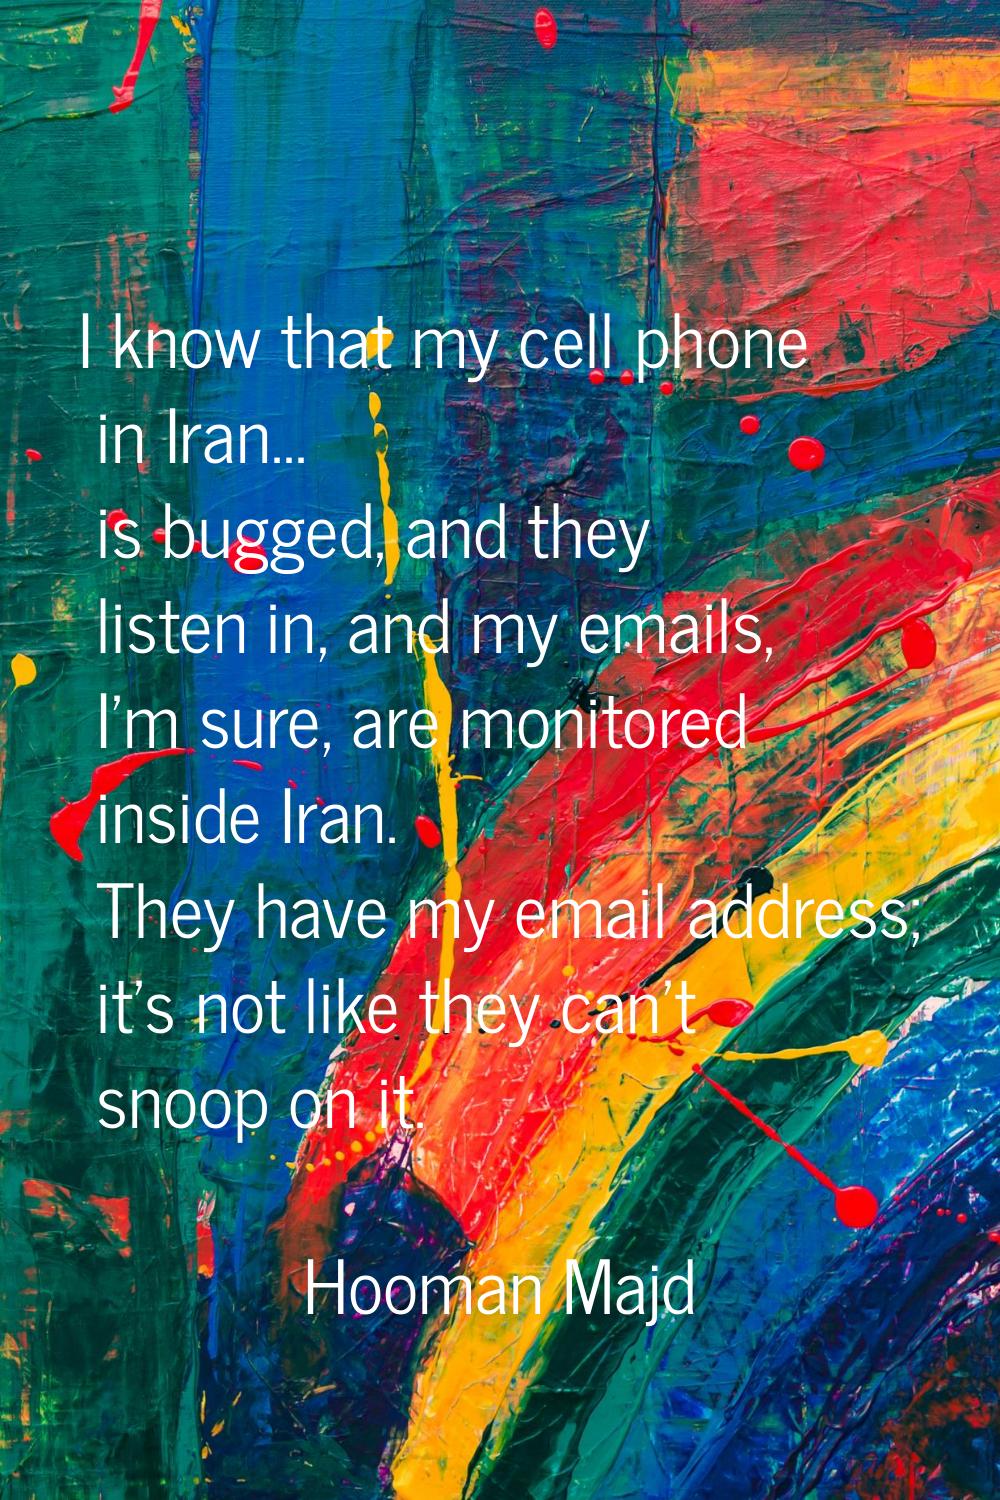 I know that my cell phone in Iran... is bugged, and they listen in, and my emails, I'm sure, are mo